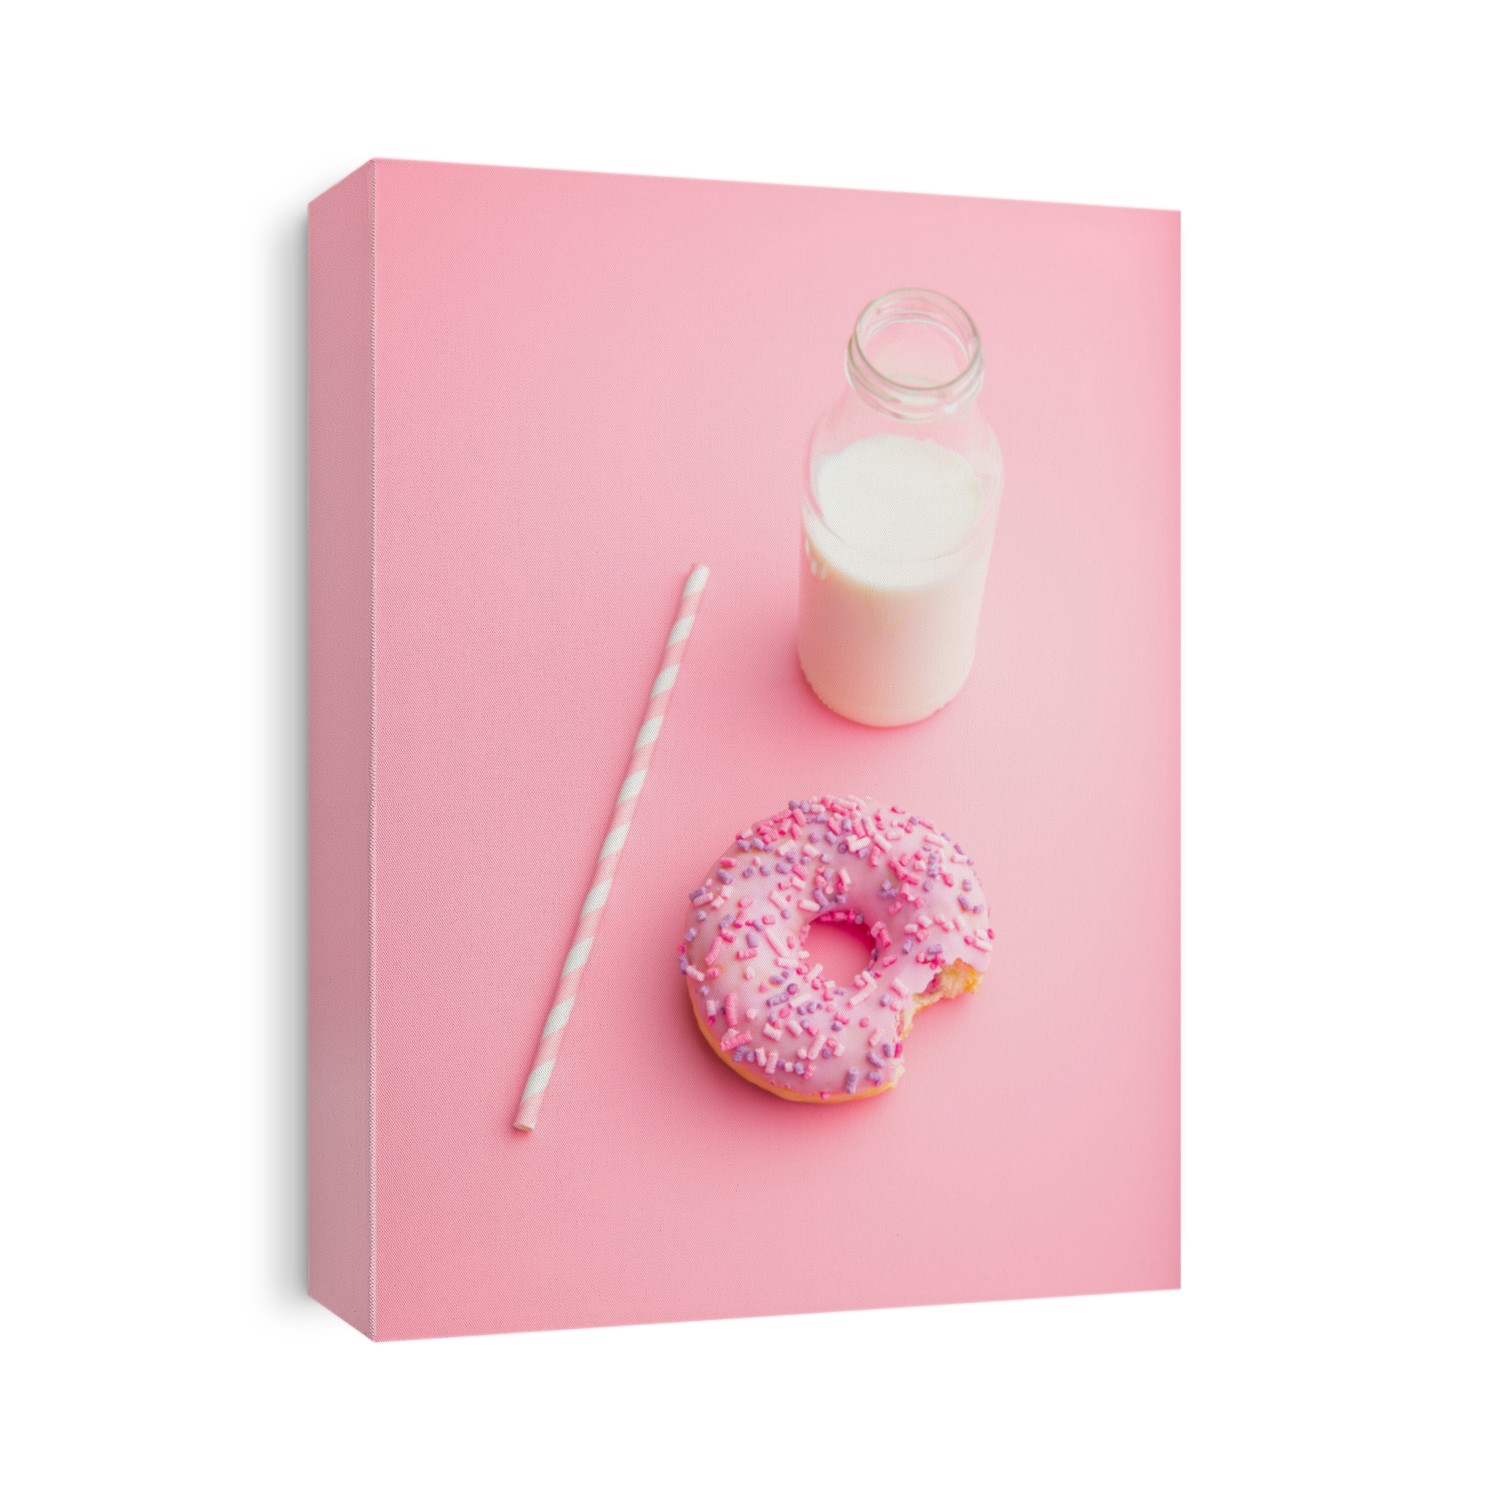 Pink donut and milk bottle on pink background.